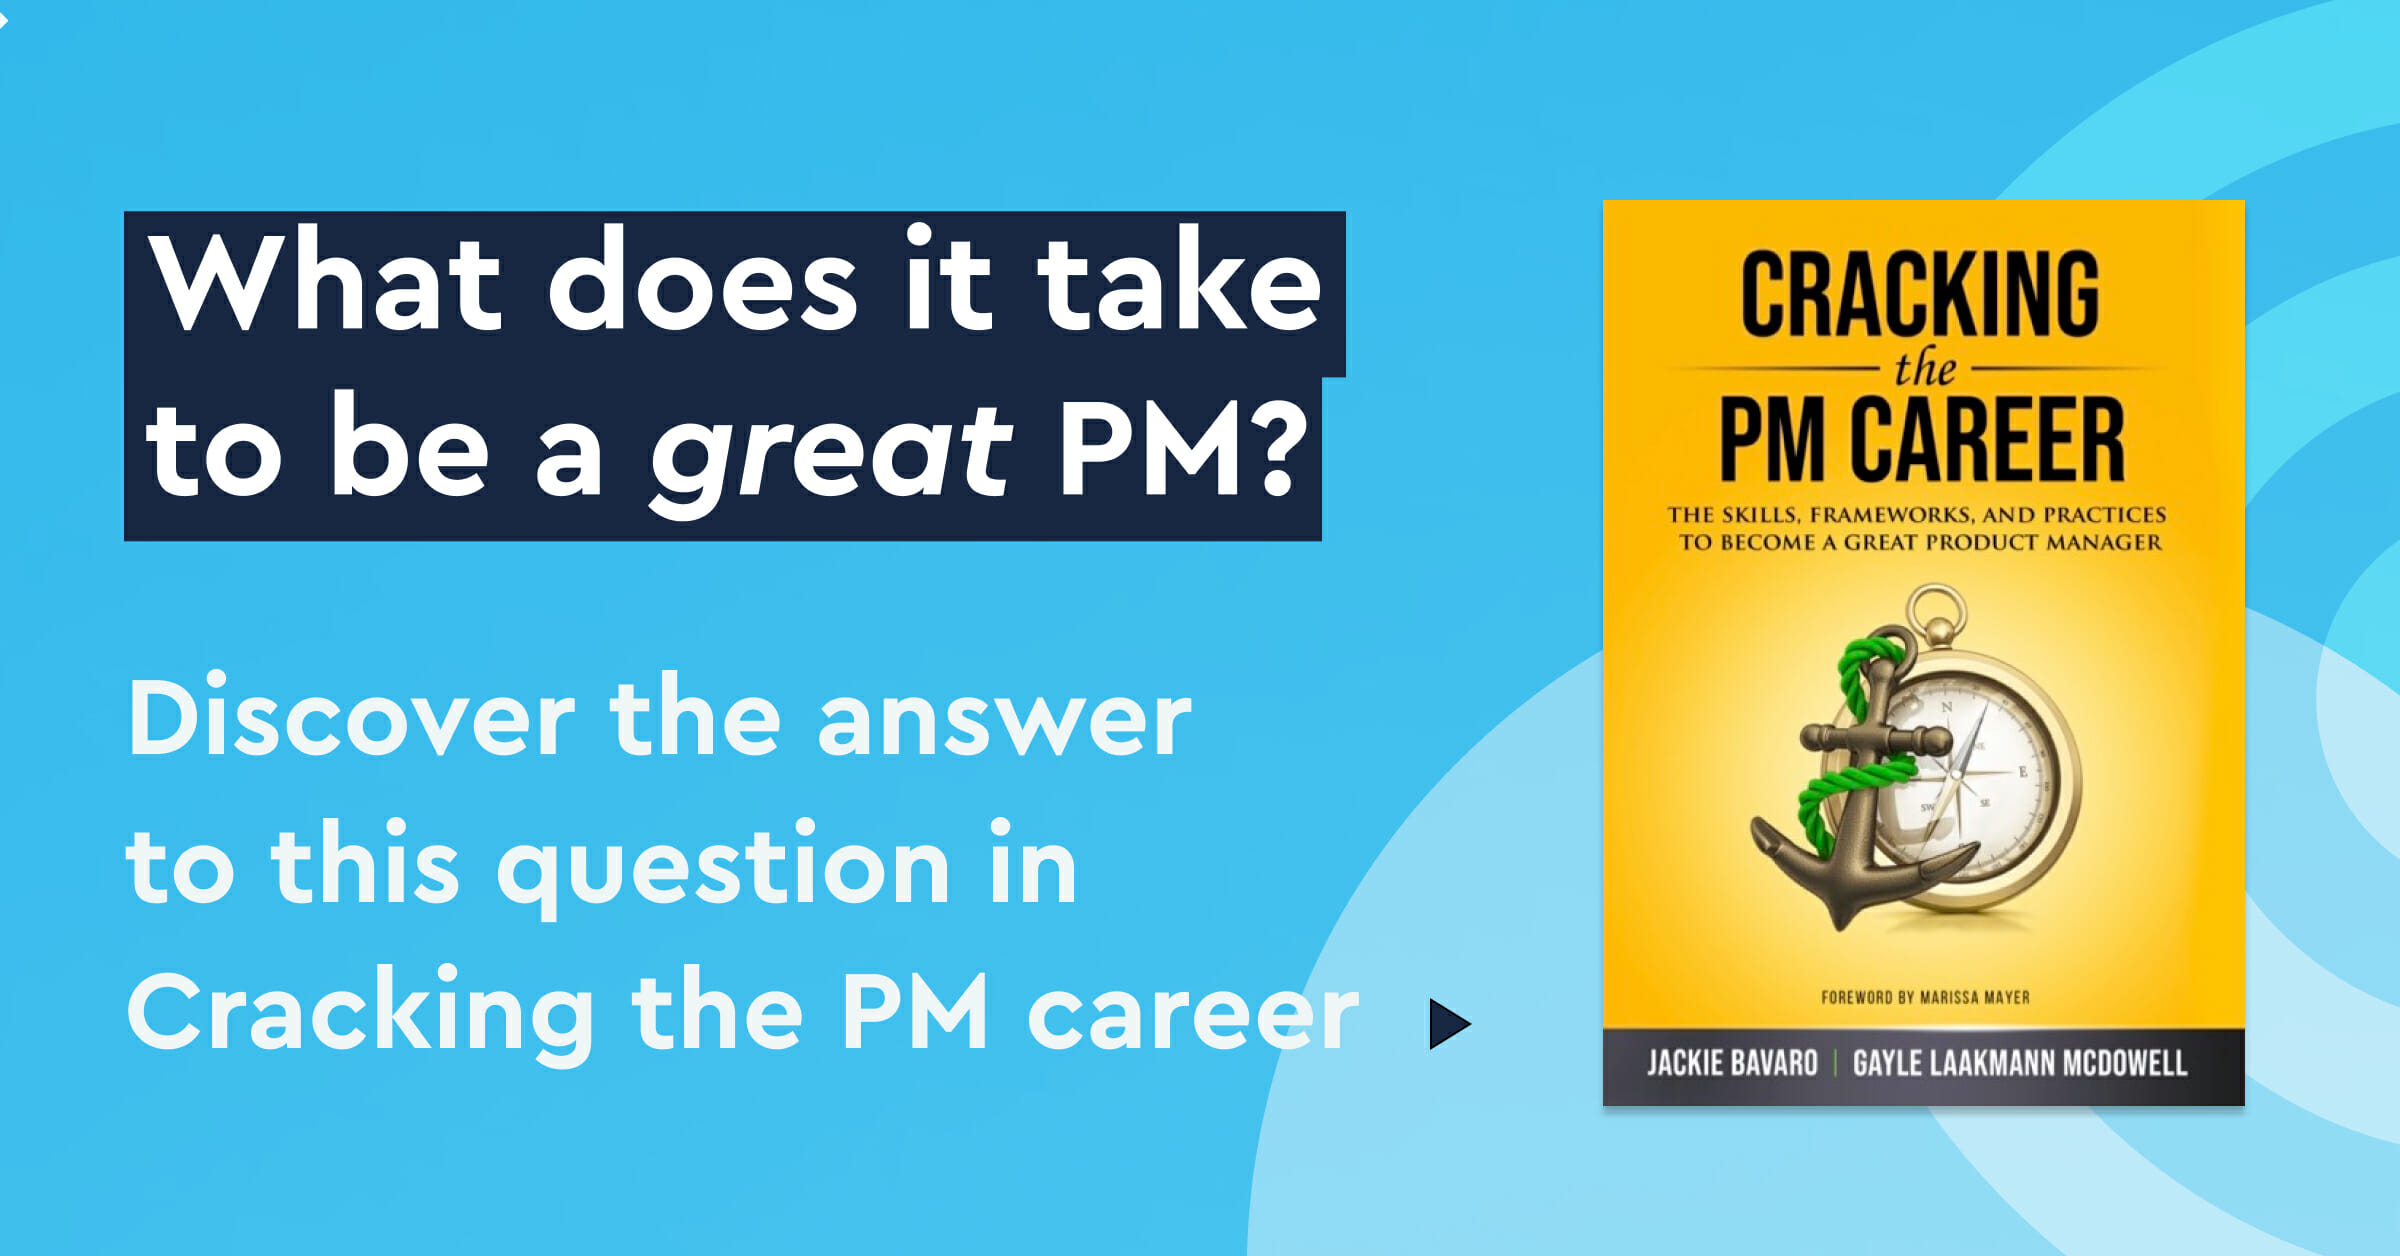 Cracking the PM career book excerpt